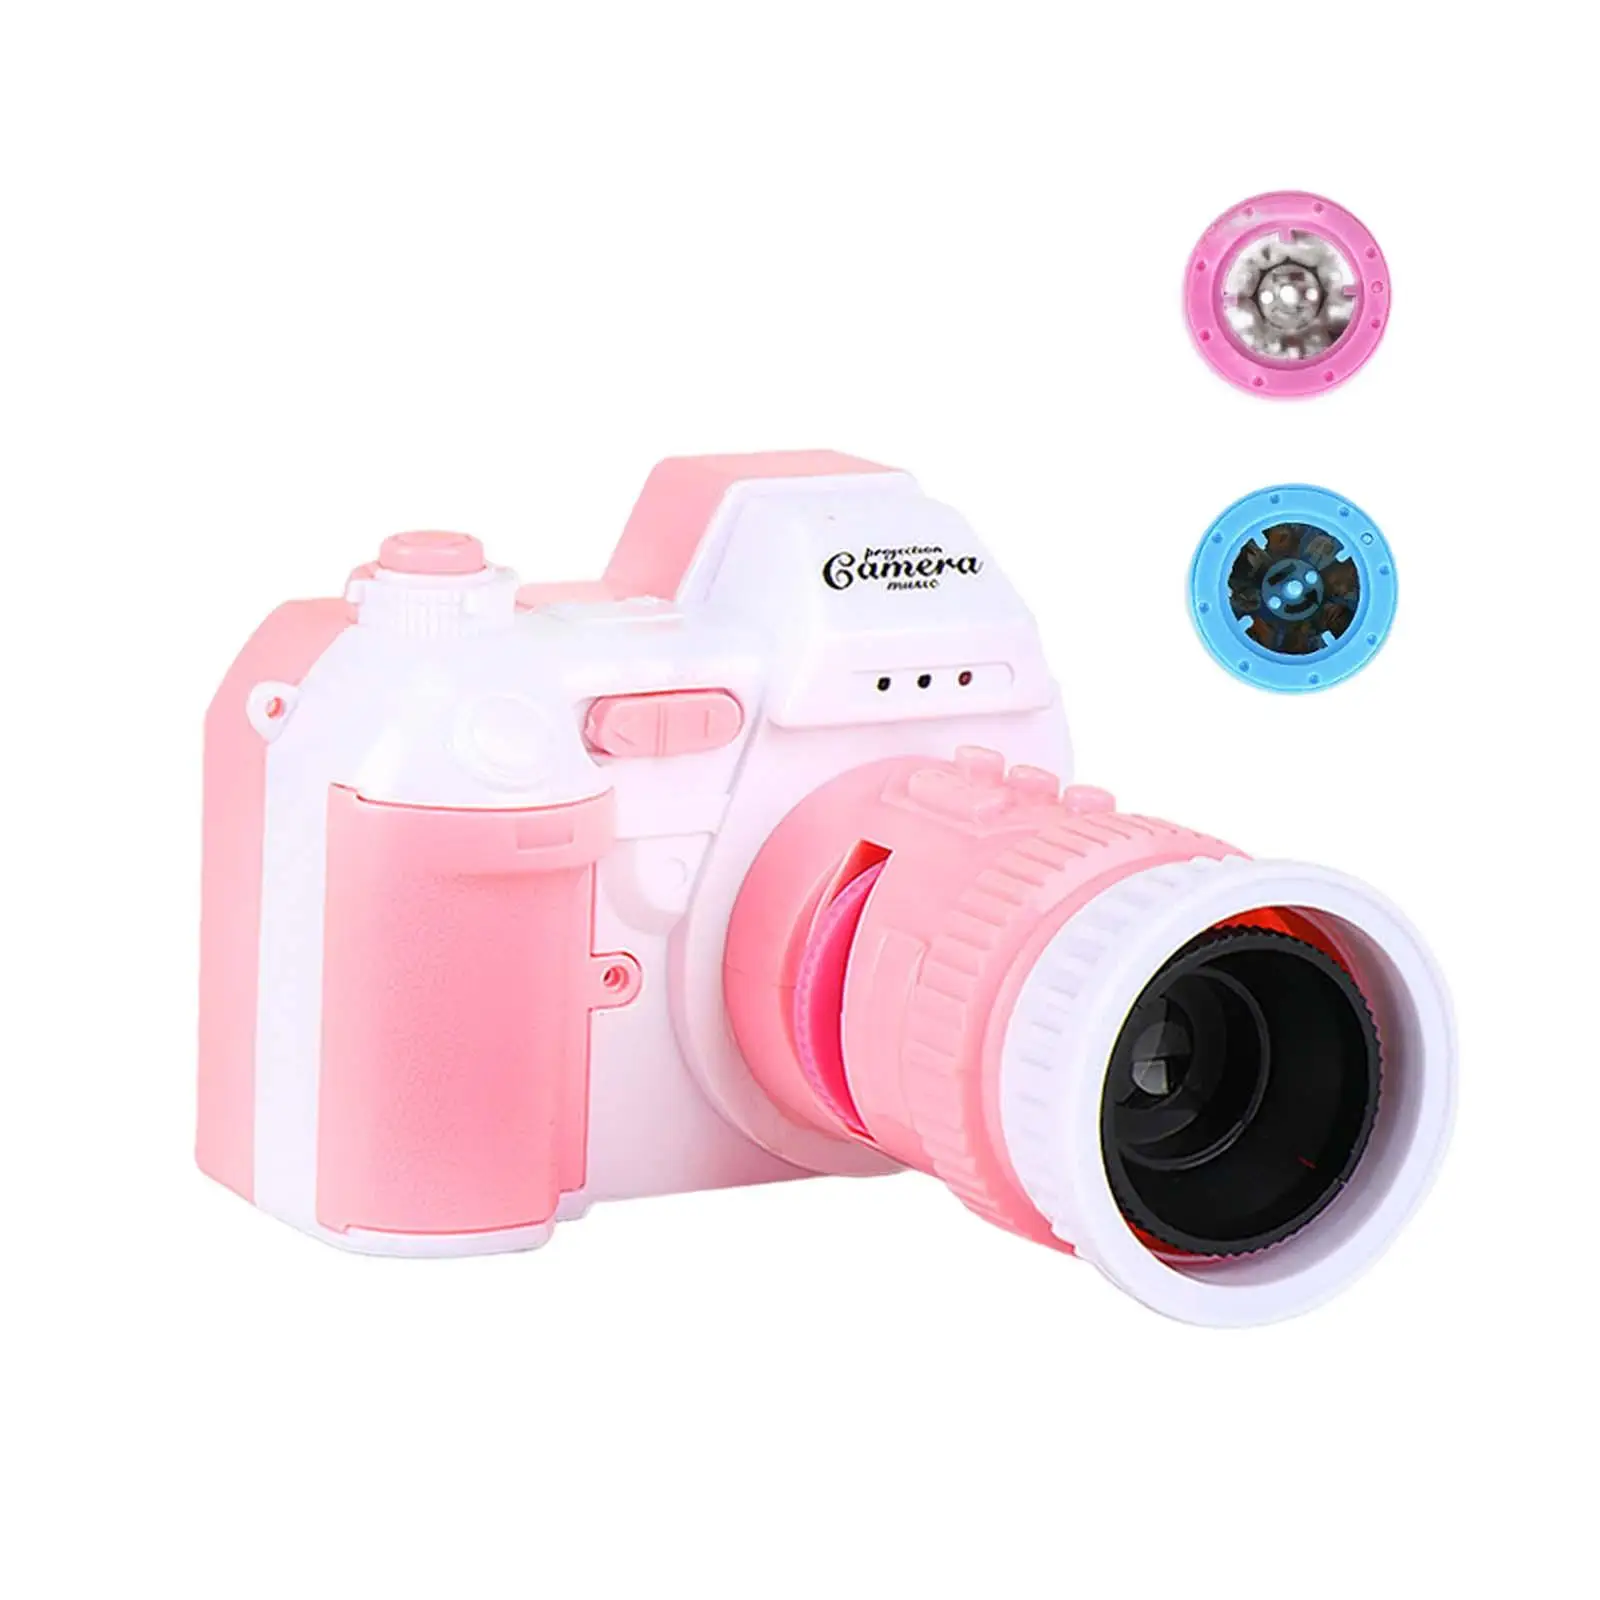 

Projection Camera Toy Early Learning with Lights and Music for Birthday Gifts Children Day Holiday Age 3-10 Years Old Boys Girls